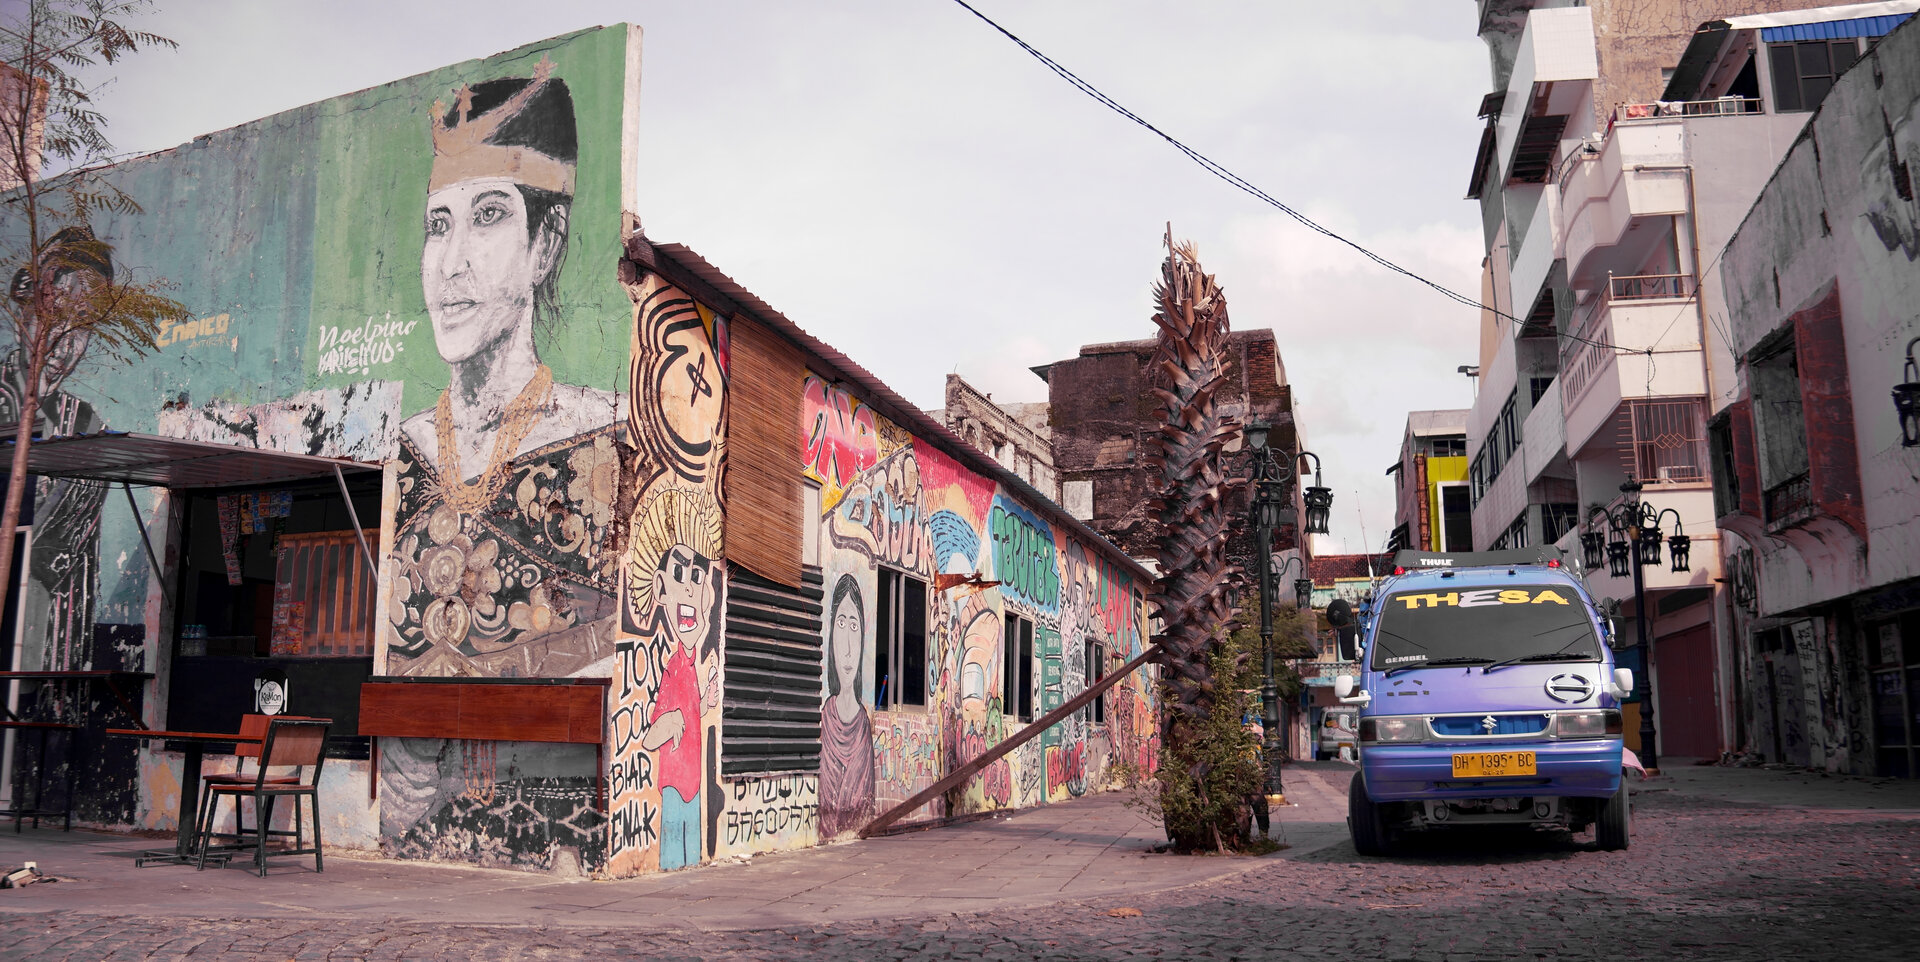 Murals in the Old City. The Noelpino mural in the foreground portrays a Rotinese woman, a group not indigenous to Kupang, but the city is home to a sizable Rotinese diaspora, many of whom have resided in Old Kupang for centuries.